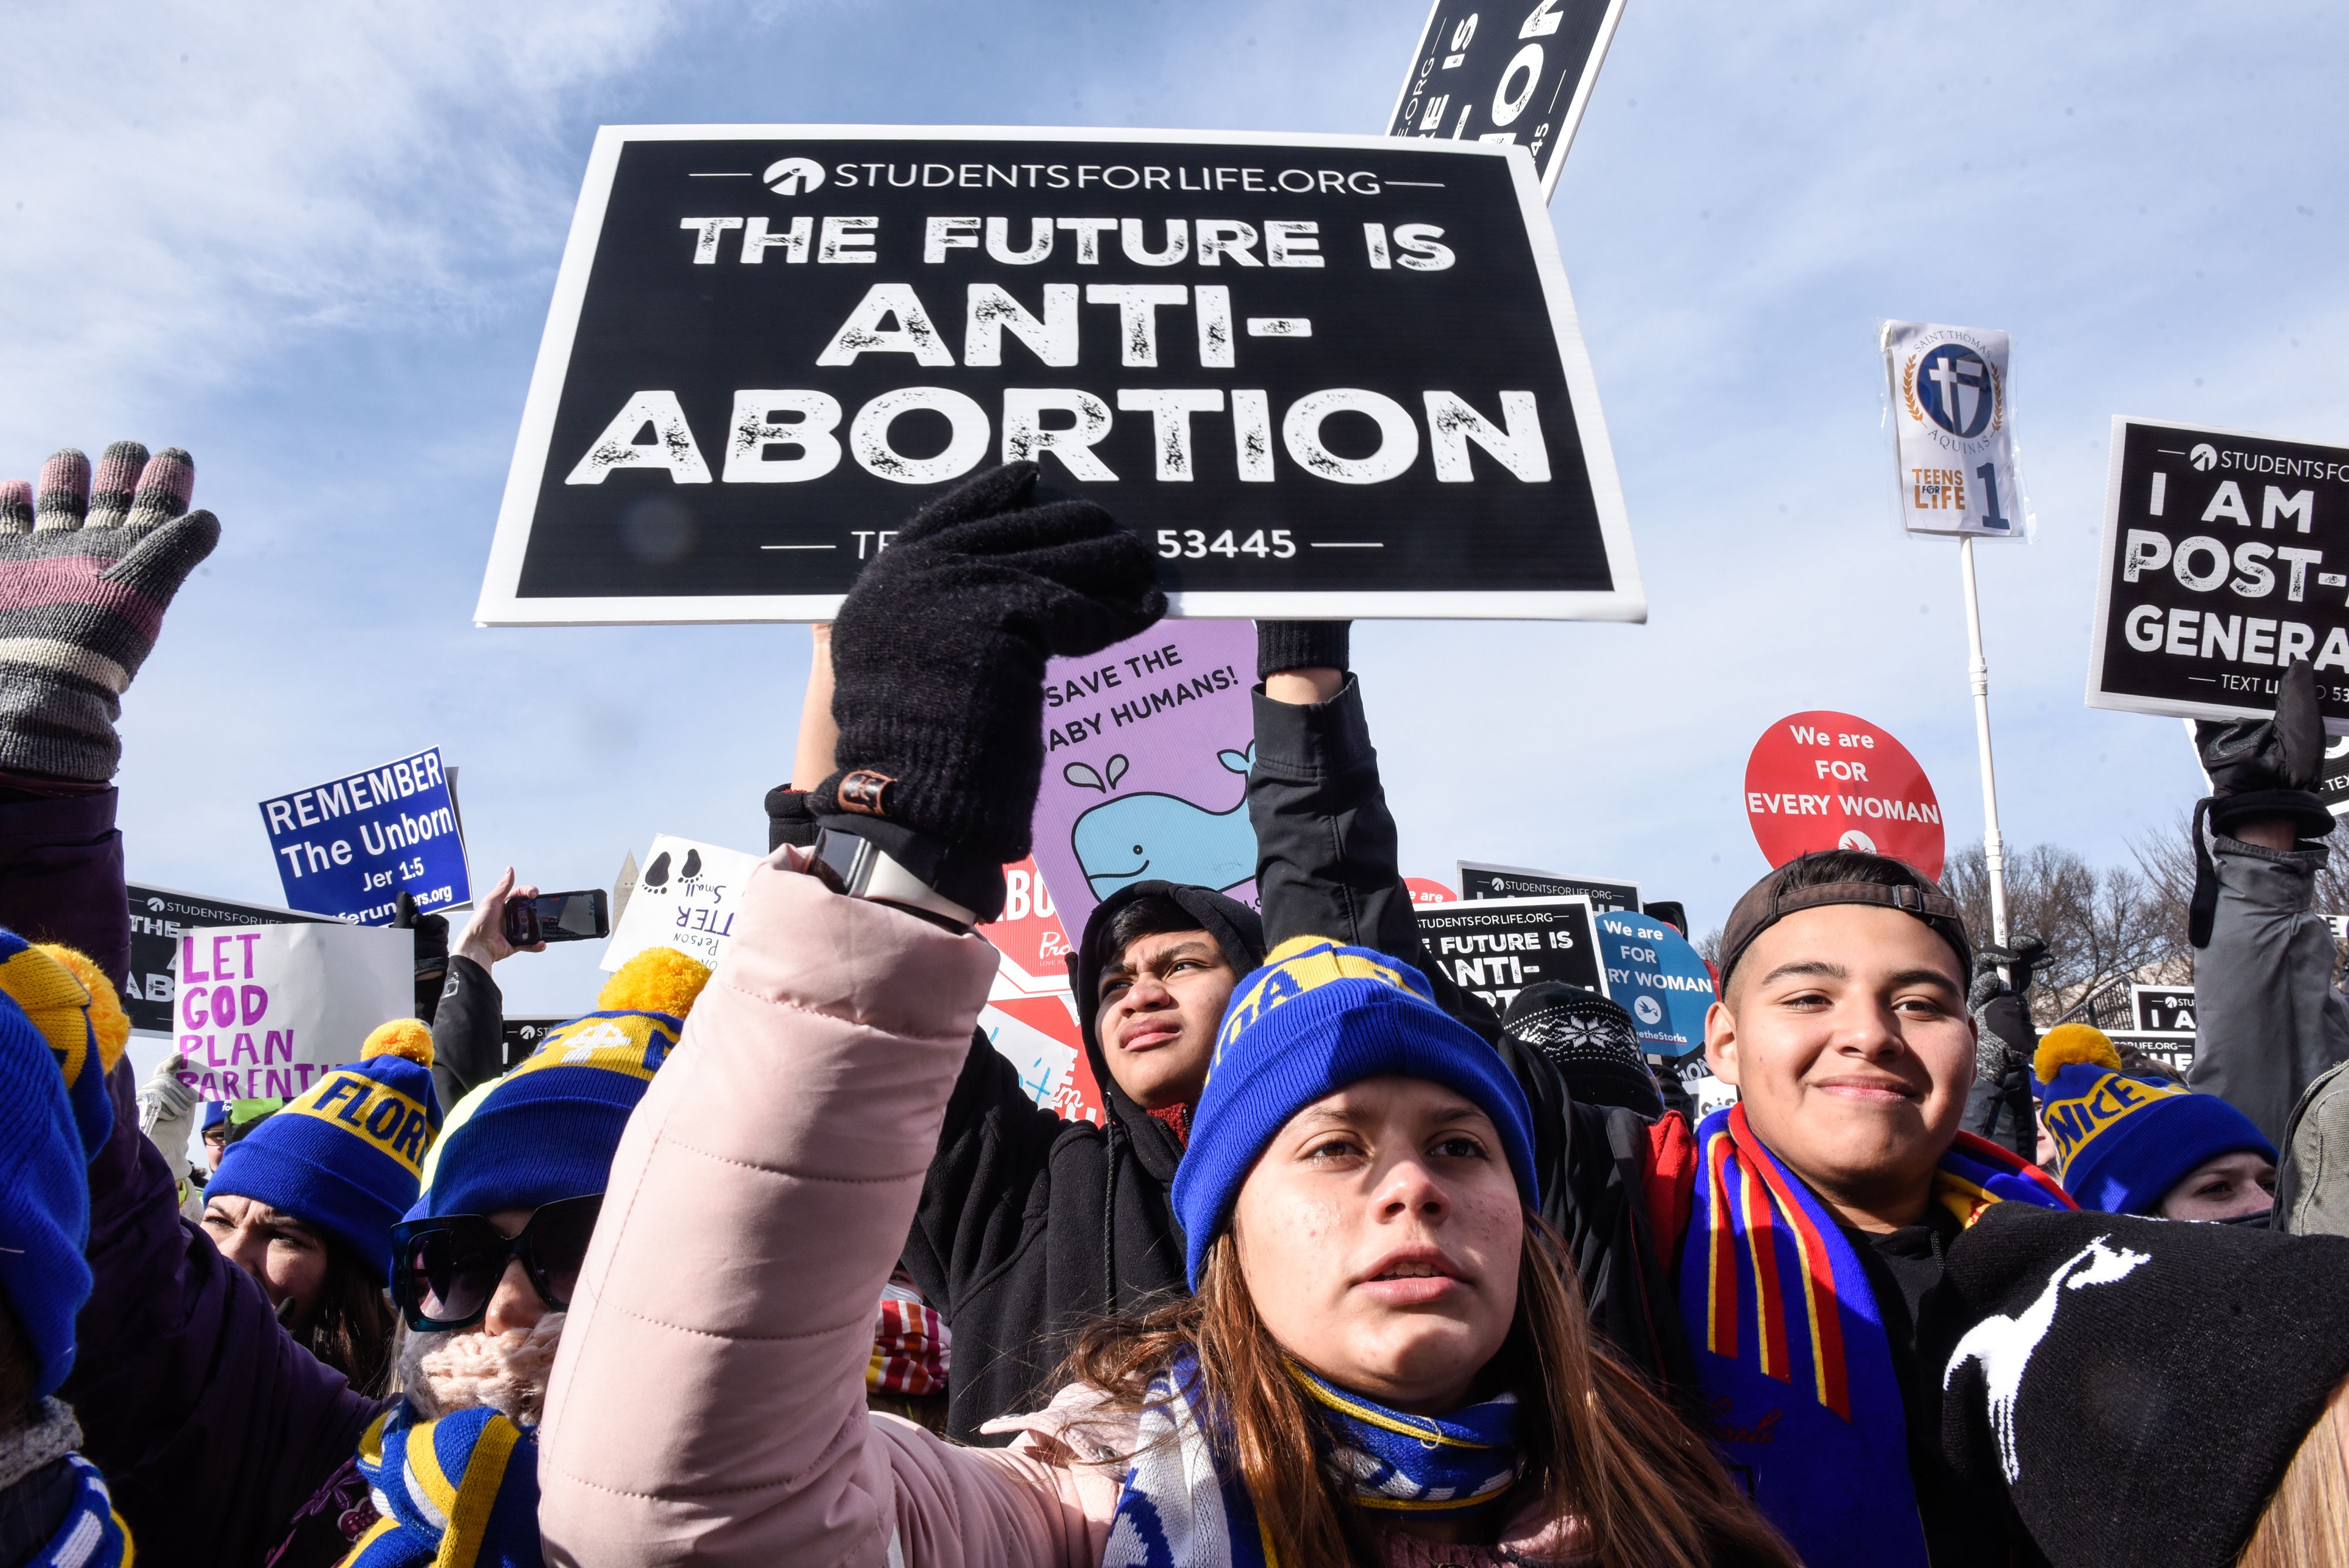 Photo of student protesters holding up signs that say "The future is anti-abortion"